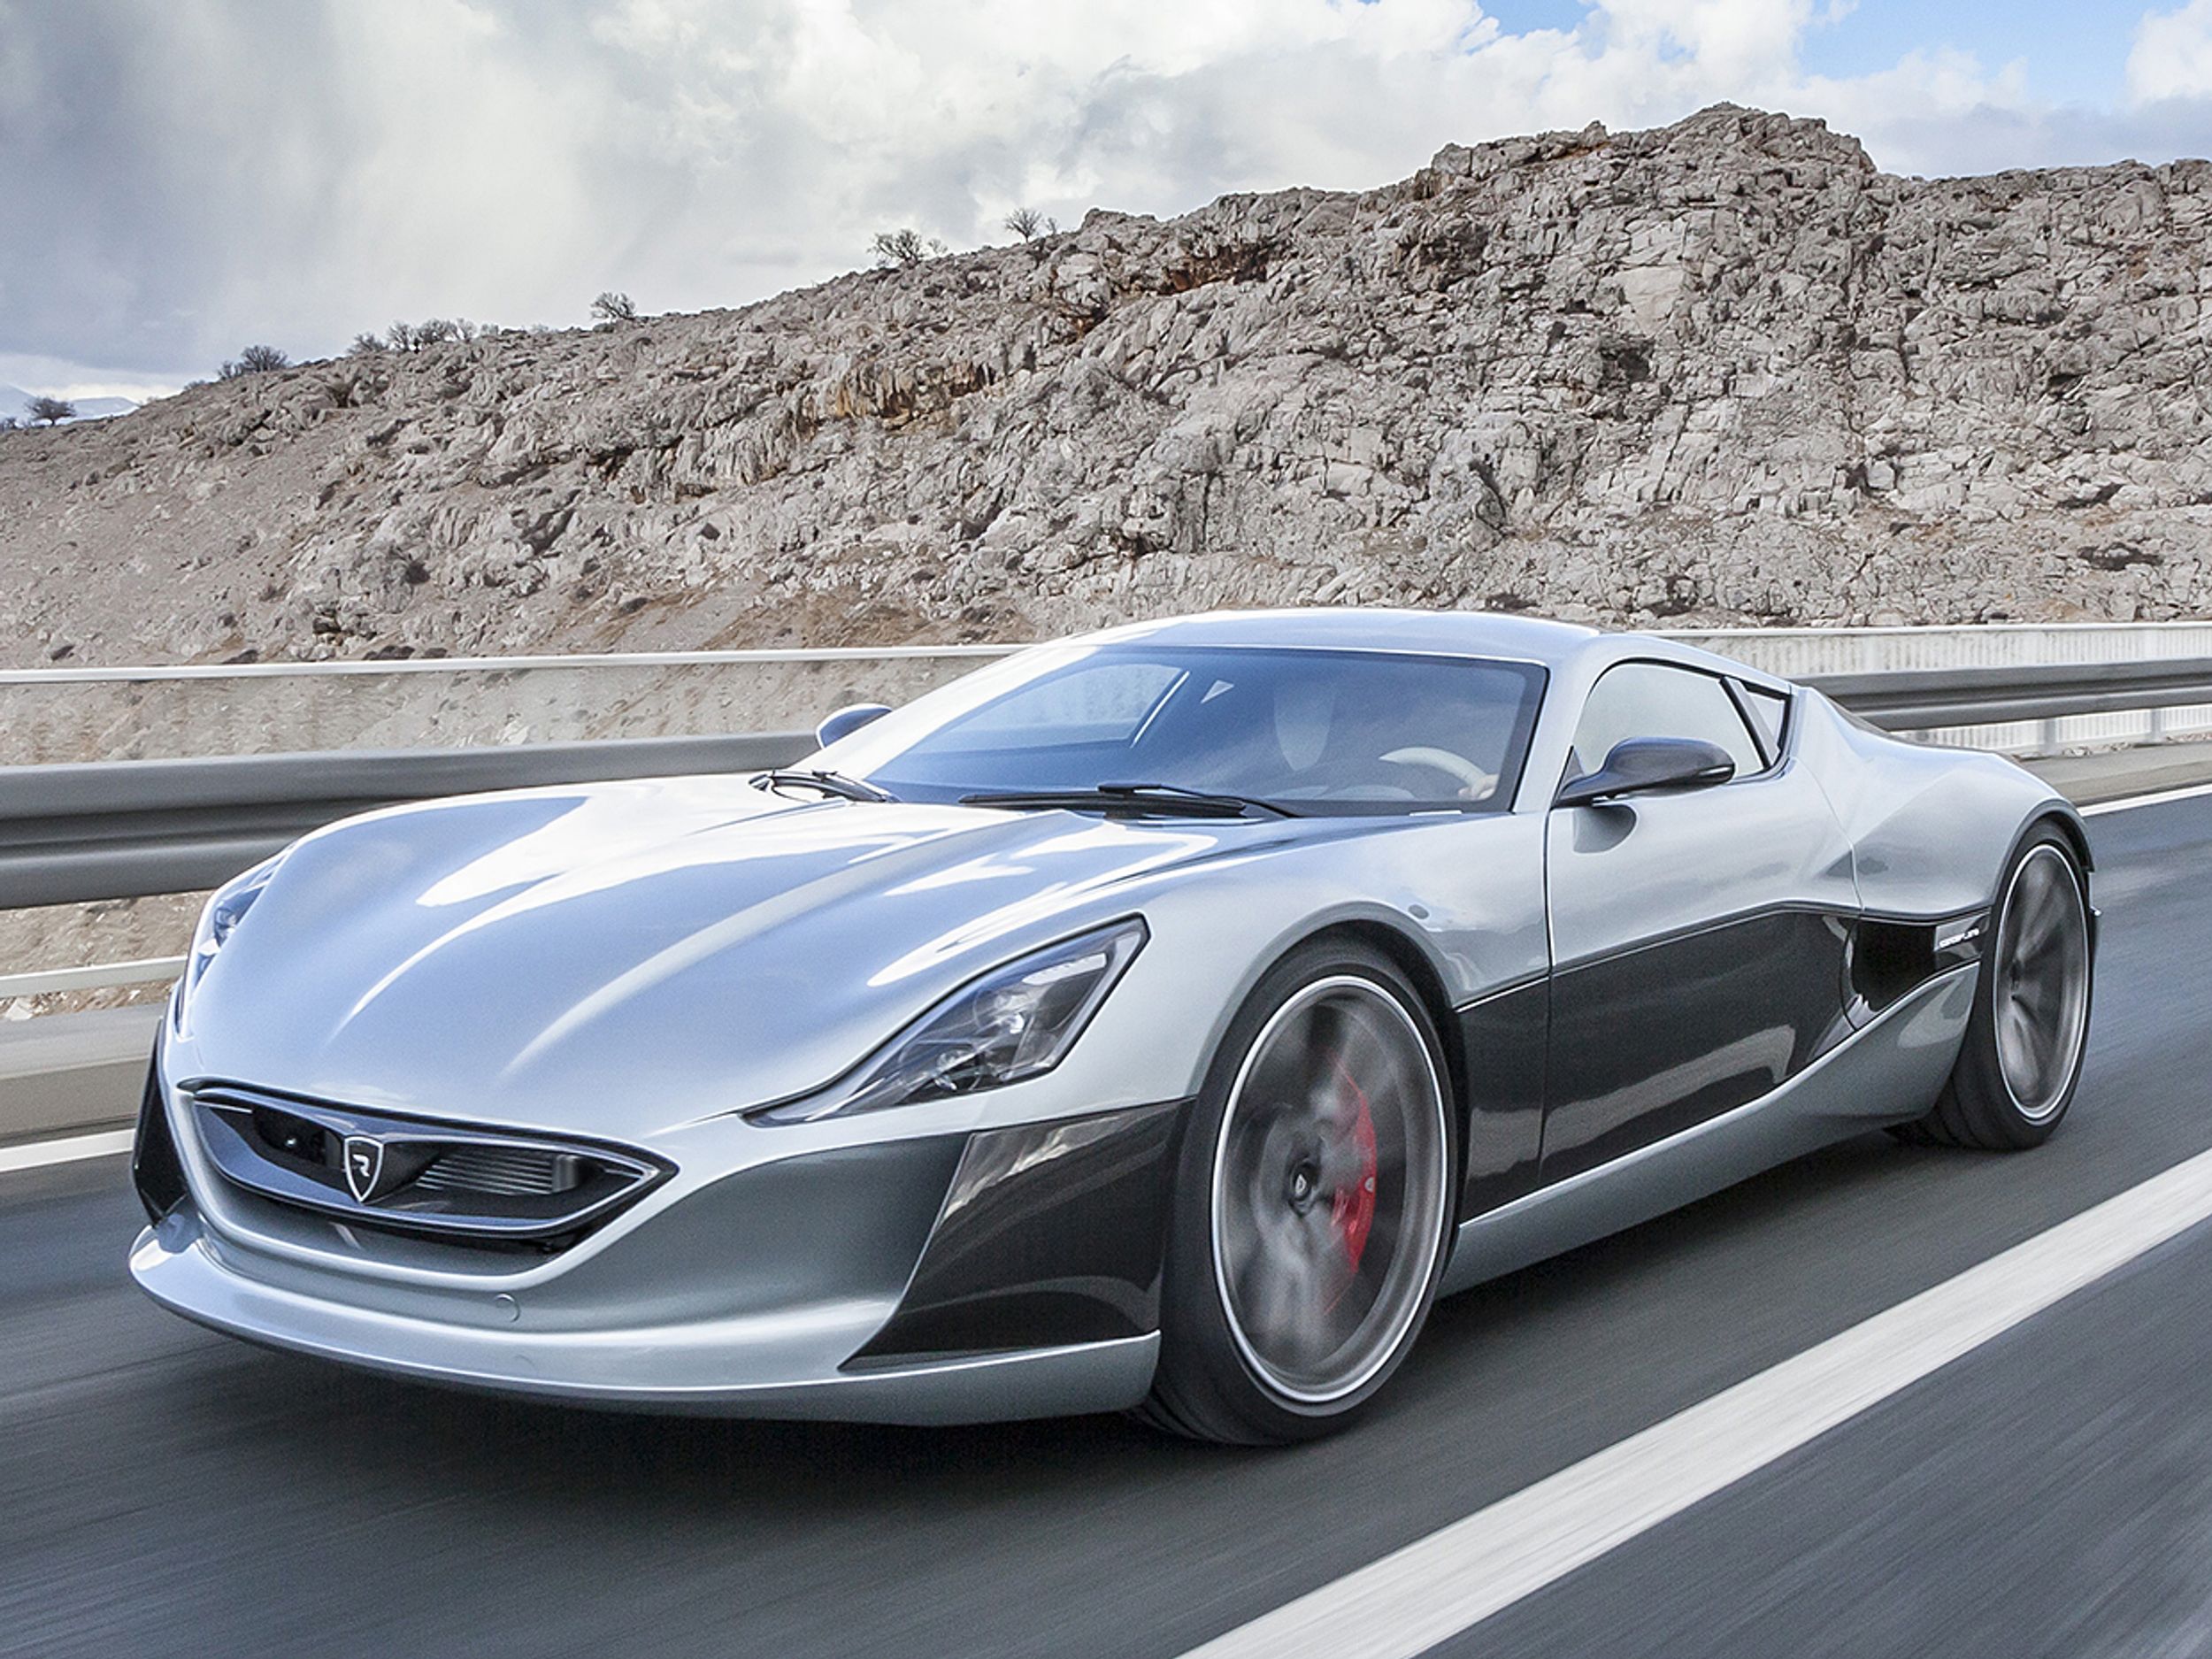 Photo of the Rimac Concept One.